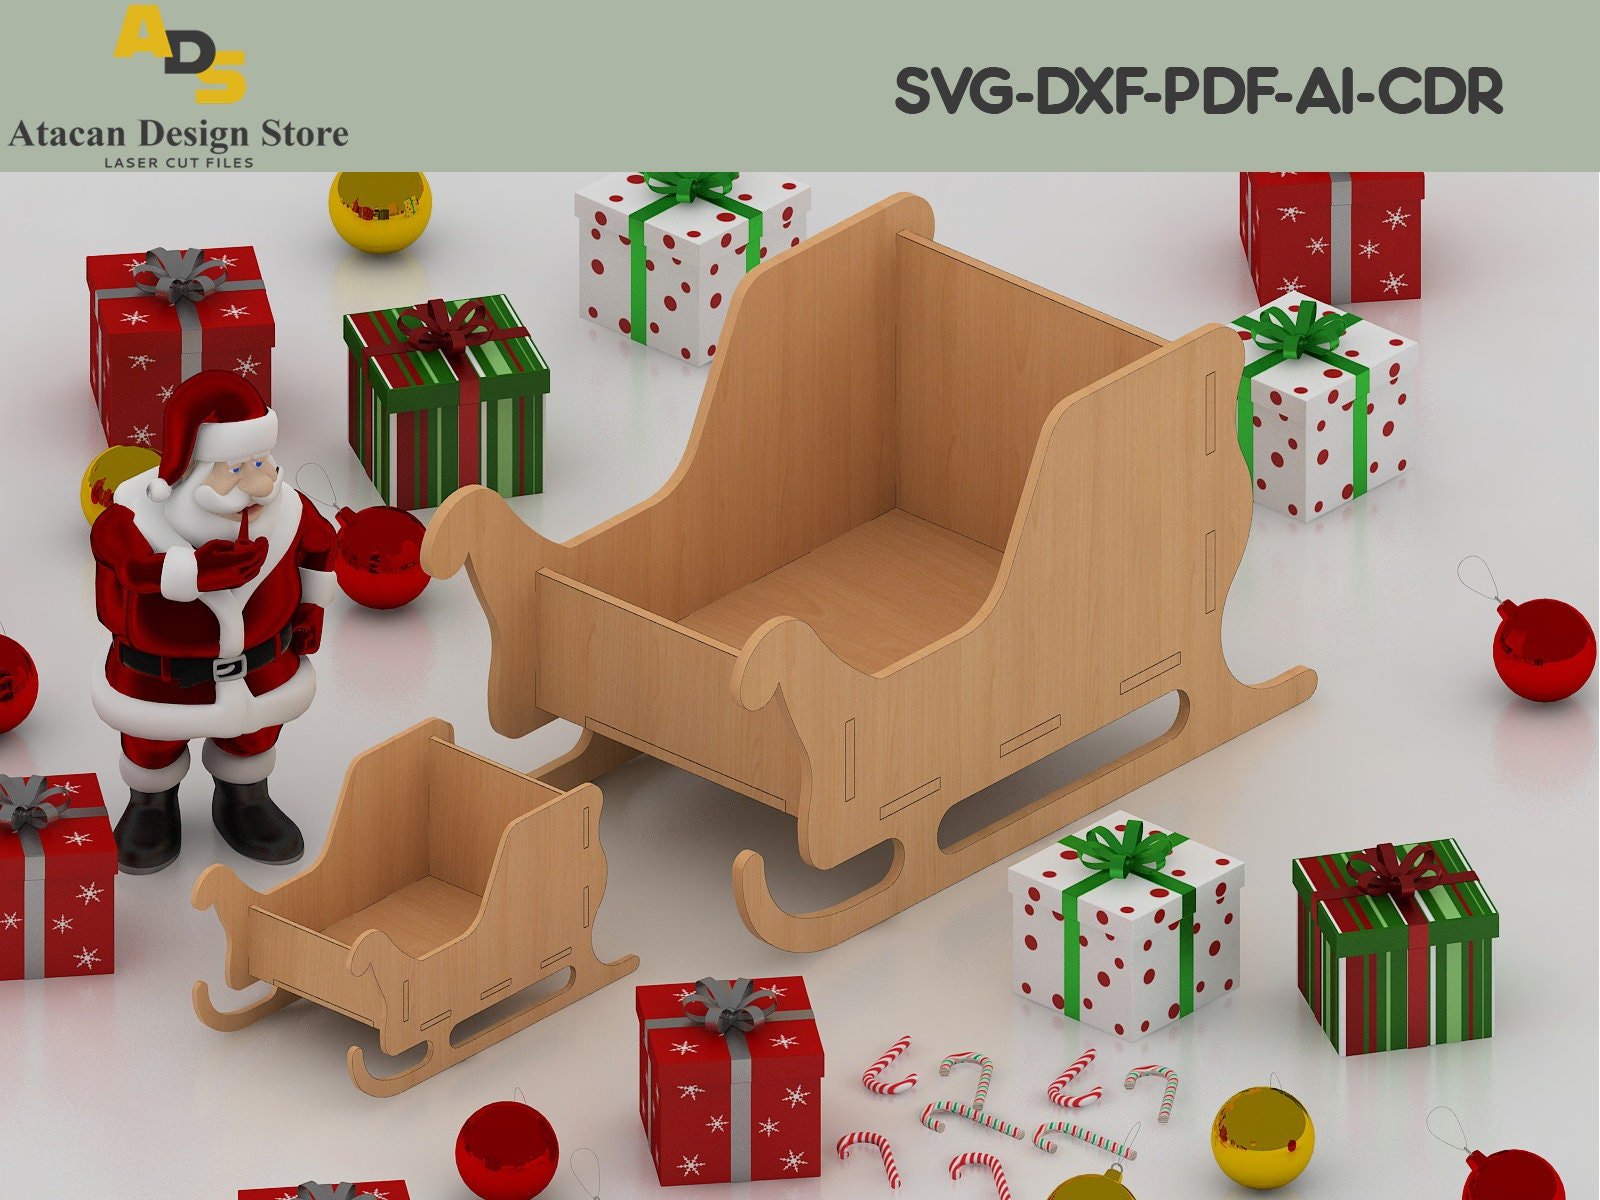 Christmas Santa Sleigh Decor Digital File For Laser and CNC | dxf ai svg eps DWG | Laser cut files, vector pattern, vector templates ADS151